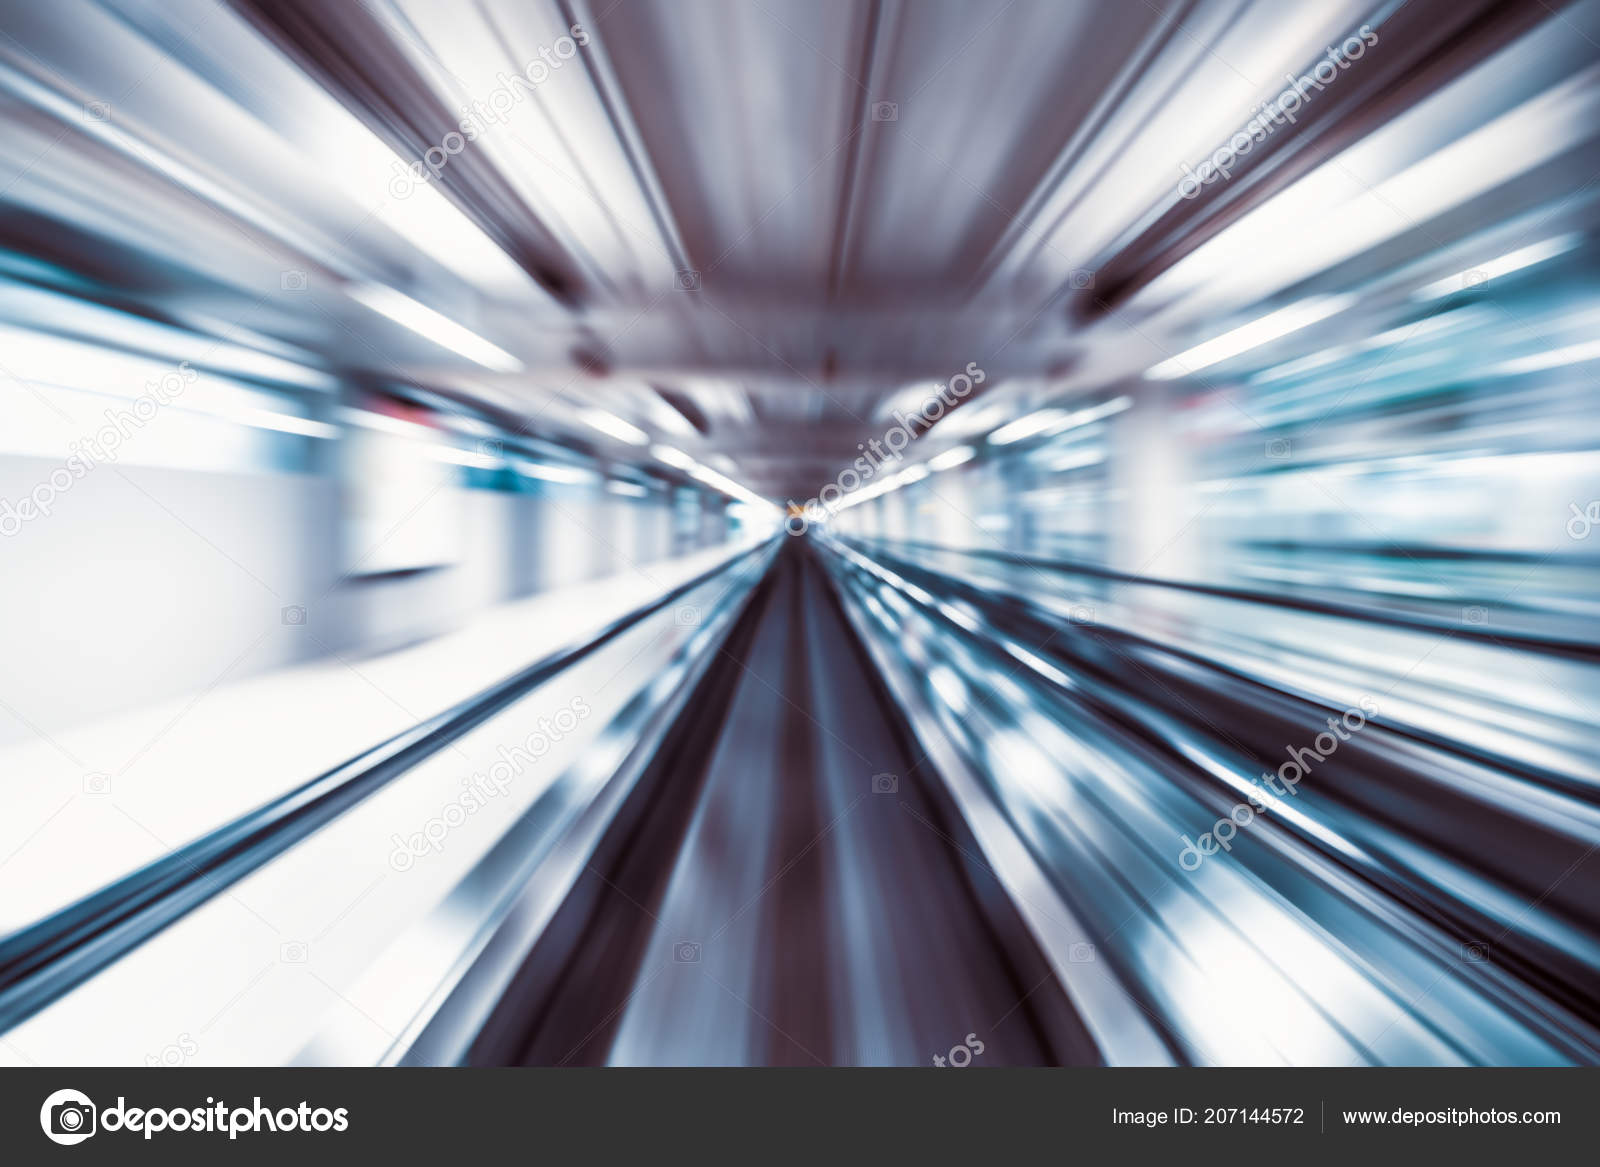 Motion Blur Abstract Background Fast Moving Walkway Travelator Airport  Terminal Stock Photo by © 207144572